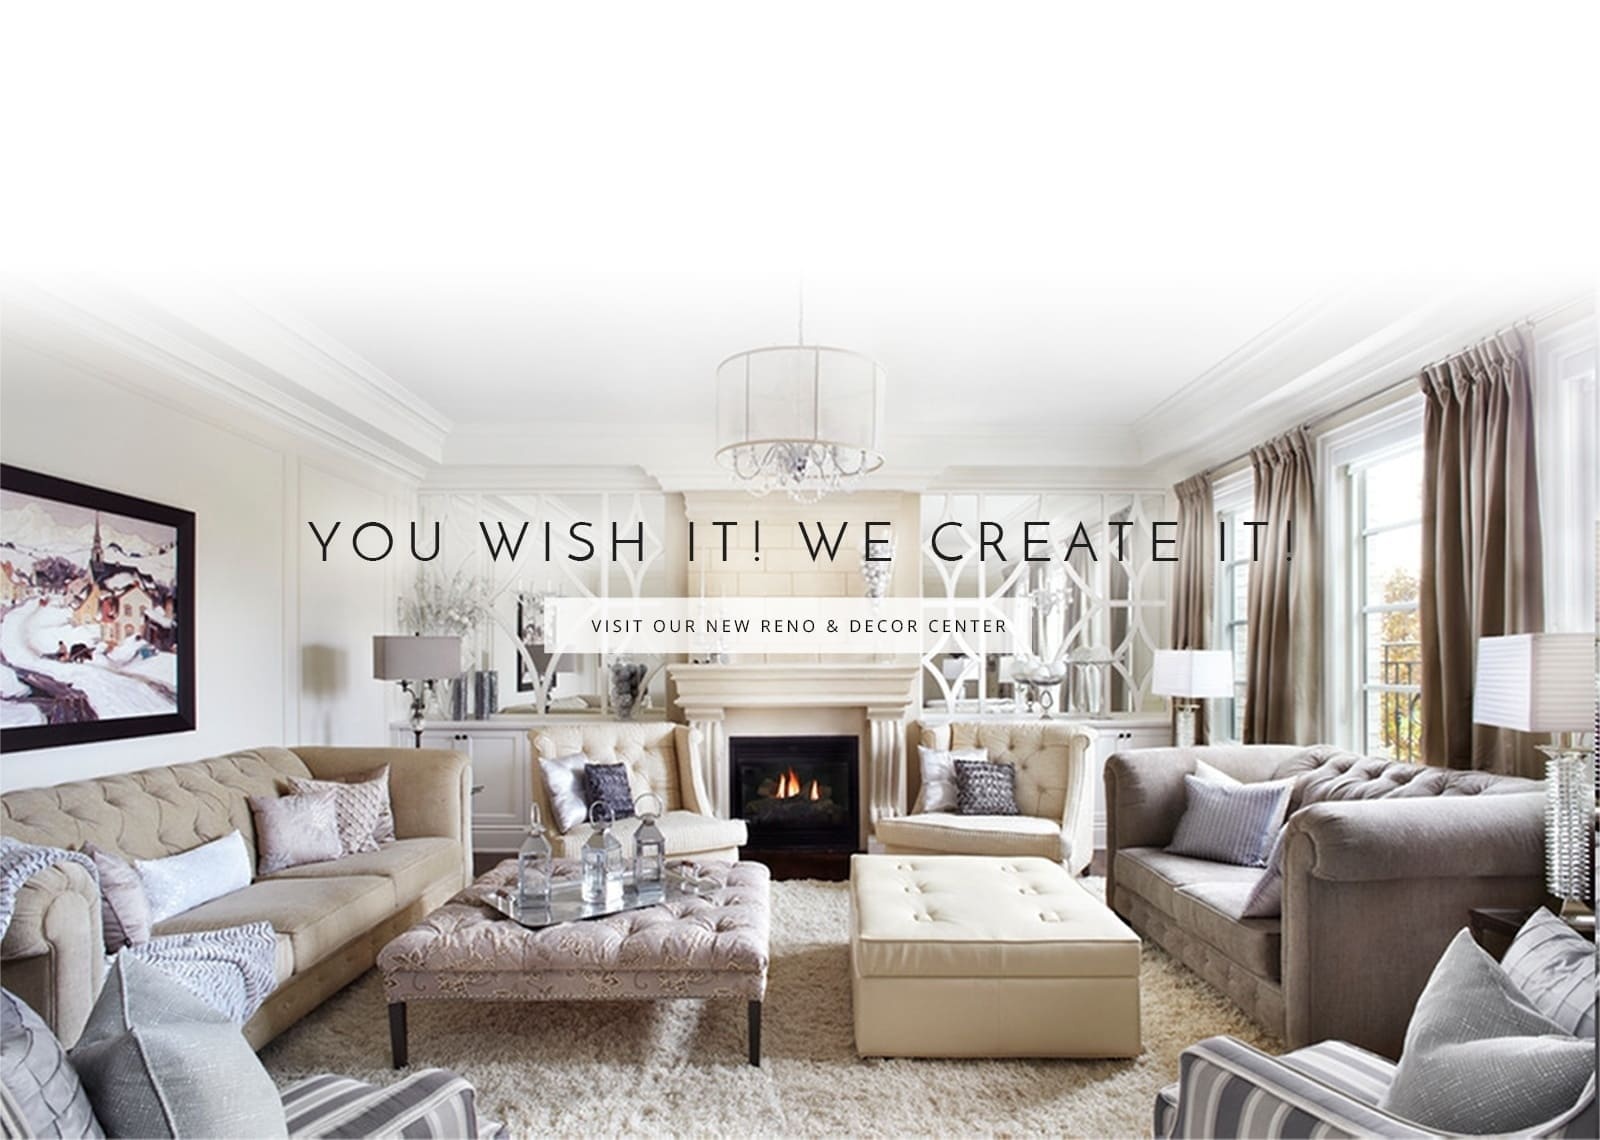 You Wish it, We Create it - Creative Design Solutions by Royal Interior Design Ltd.